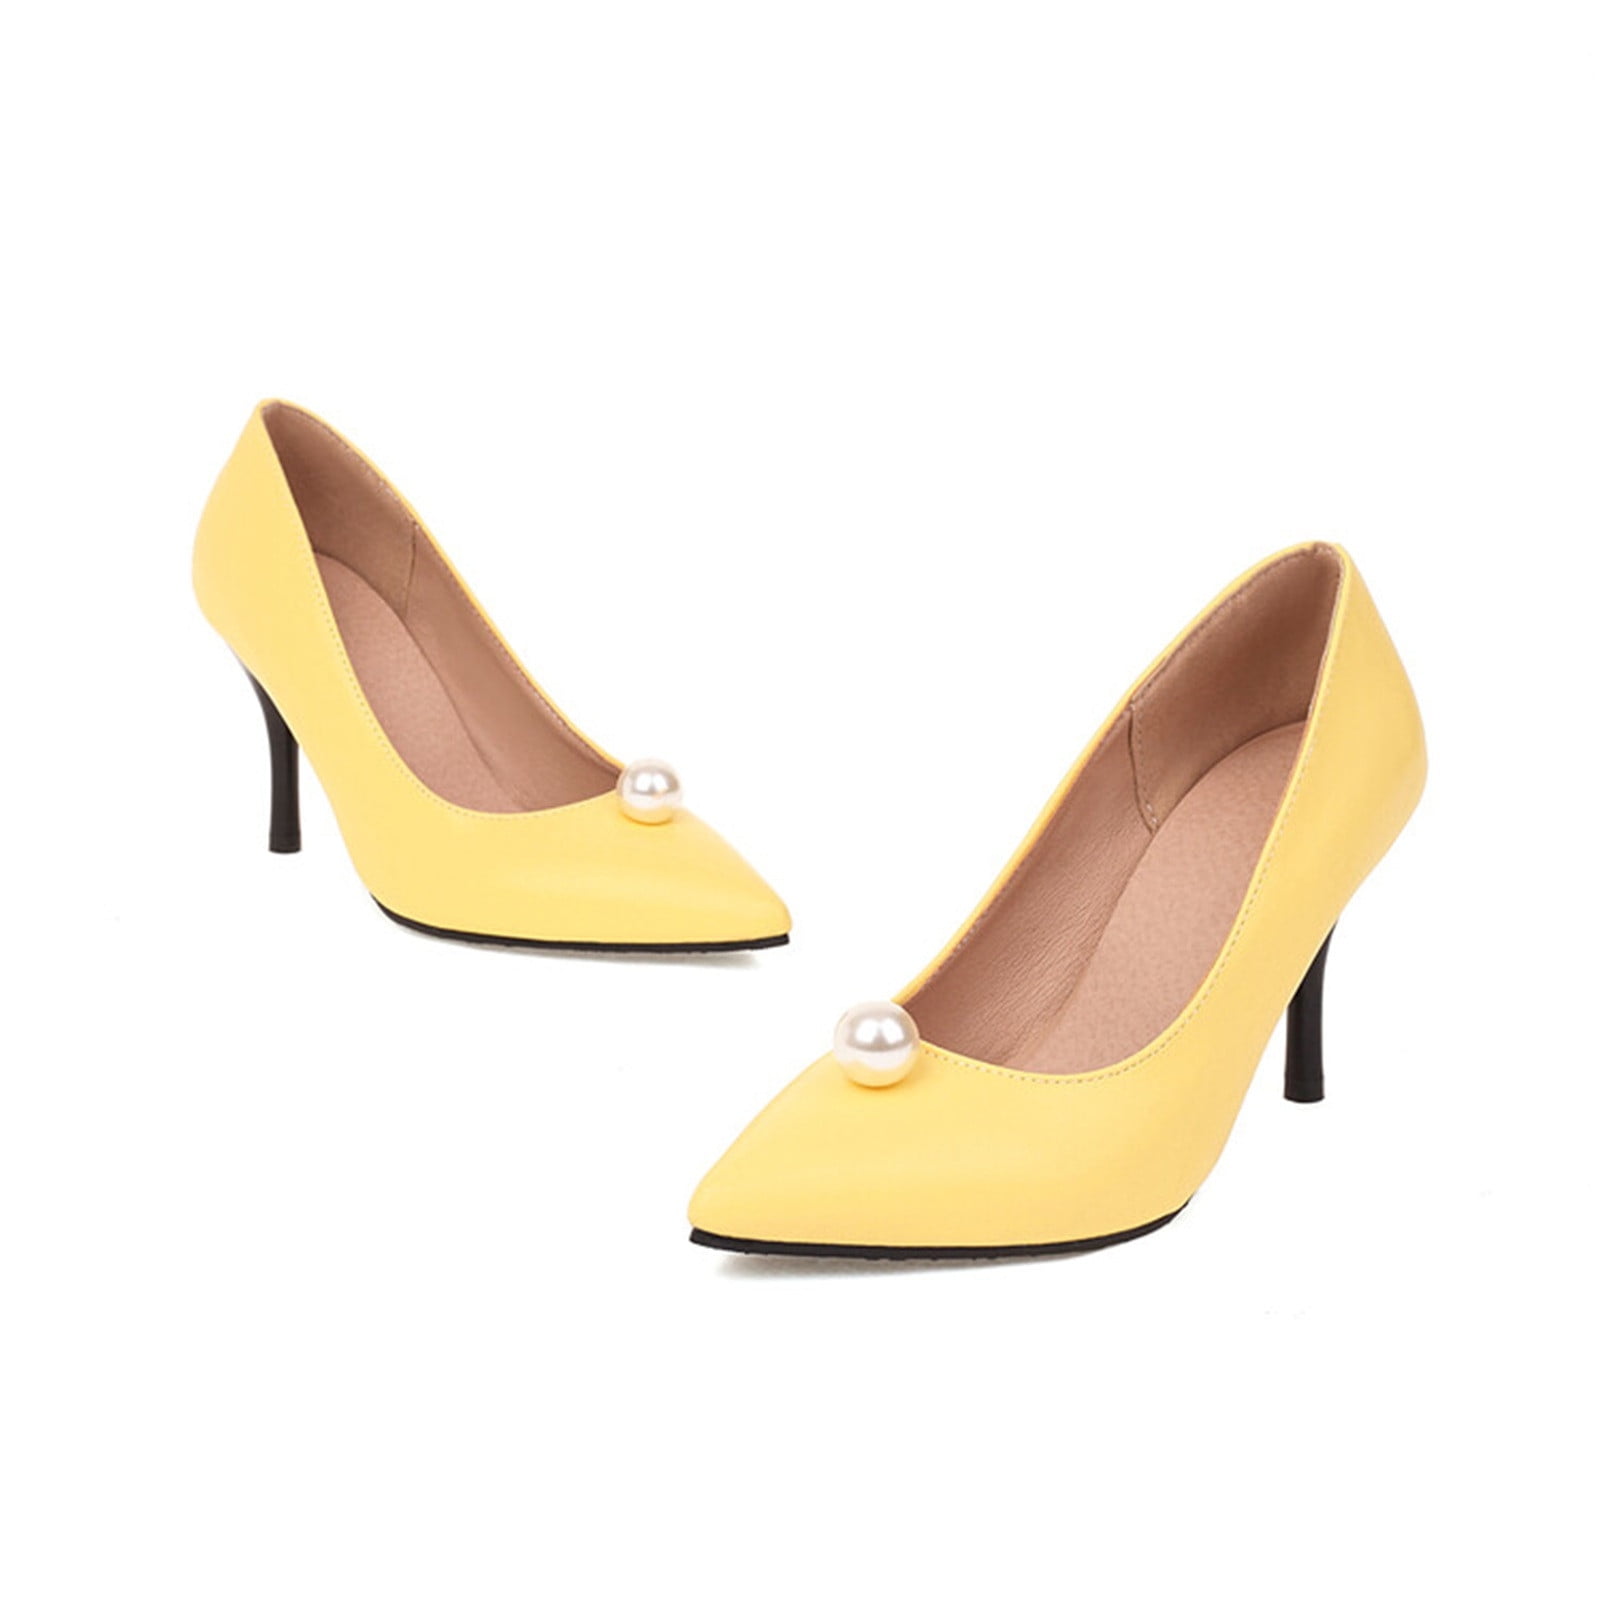 Designer Dress Shoes Sexy High Heels Women Fashion Summer Sandals Woman  Pumps Party Wedding White Yellow Block Ladies 20215245337 From Egqv, $68.9  | DHgate.Com